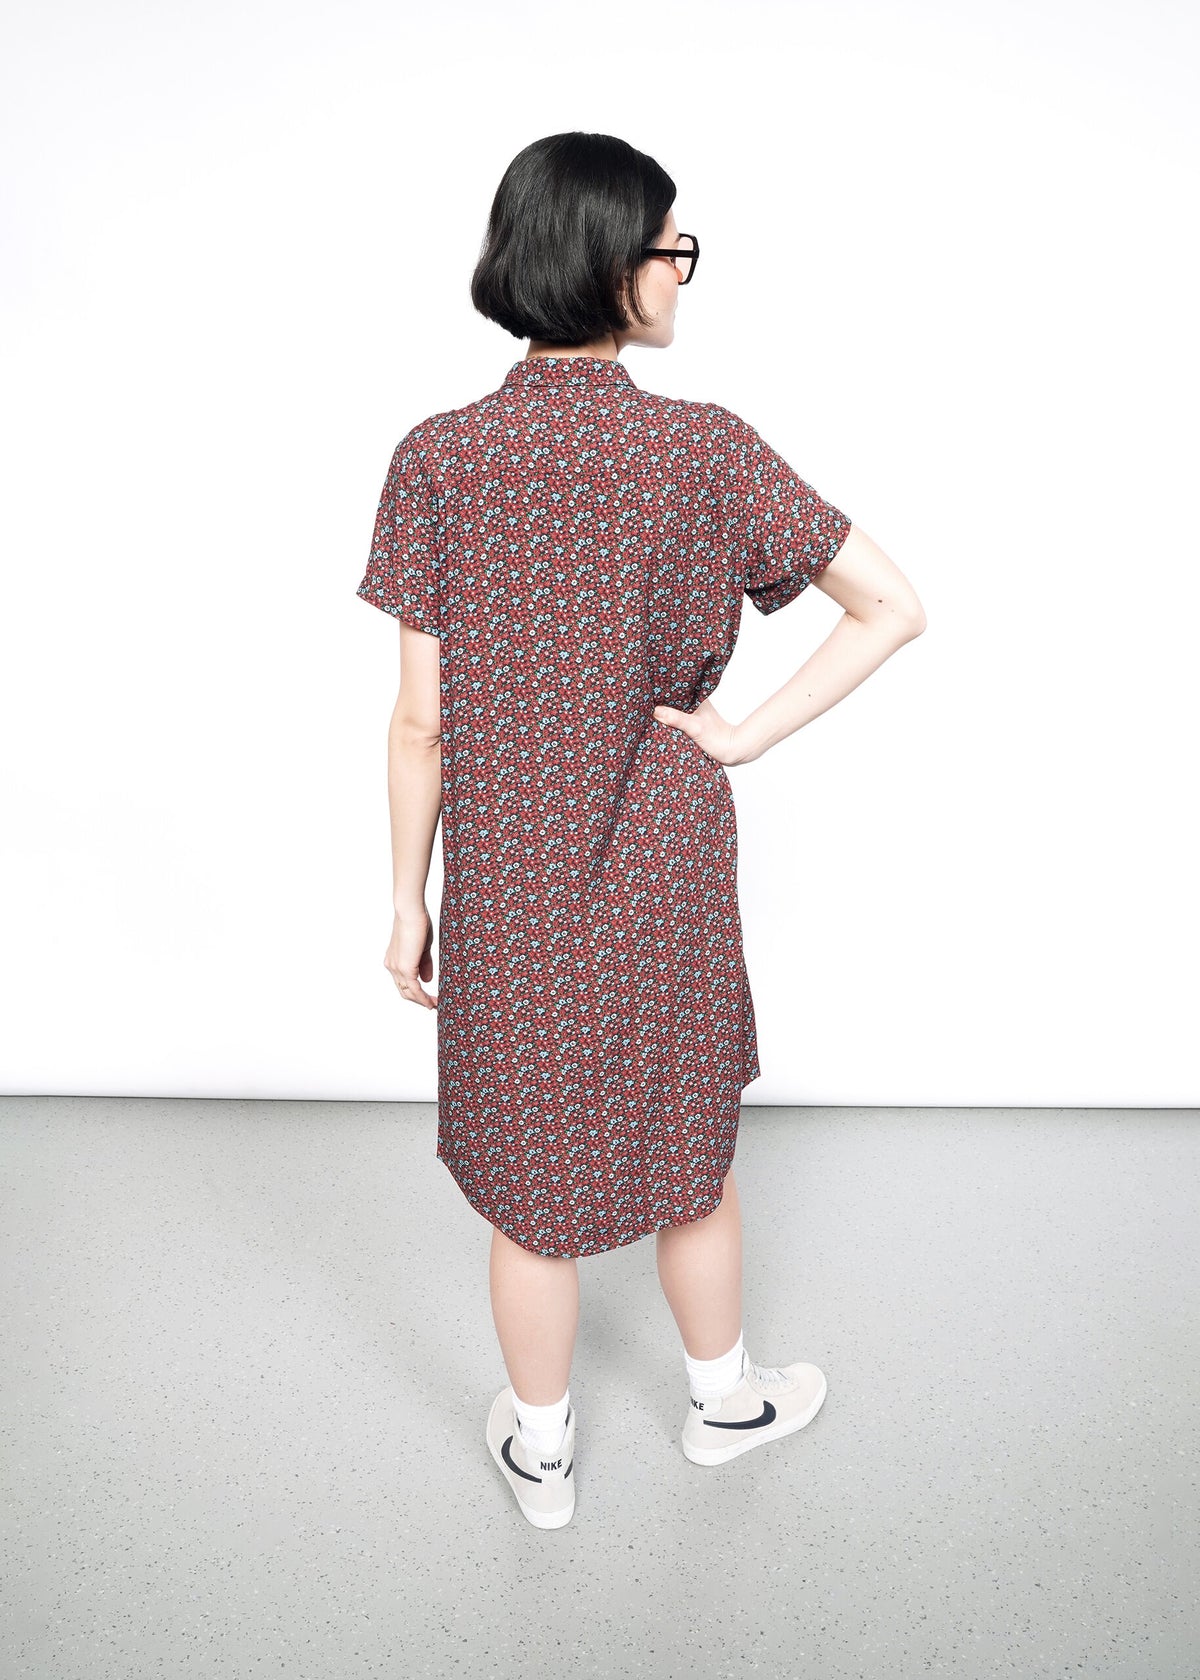 Back image of Model wearing the Empower Short Sleeve Shirt Dress in Floral Cinnamon in size S, with sunglasses, white socks, and tan sneakers